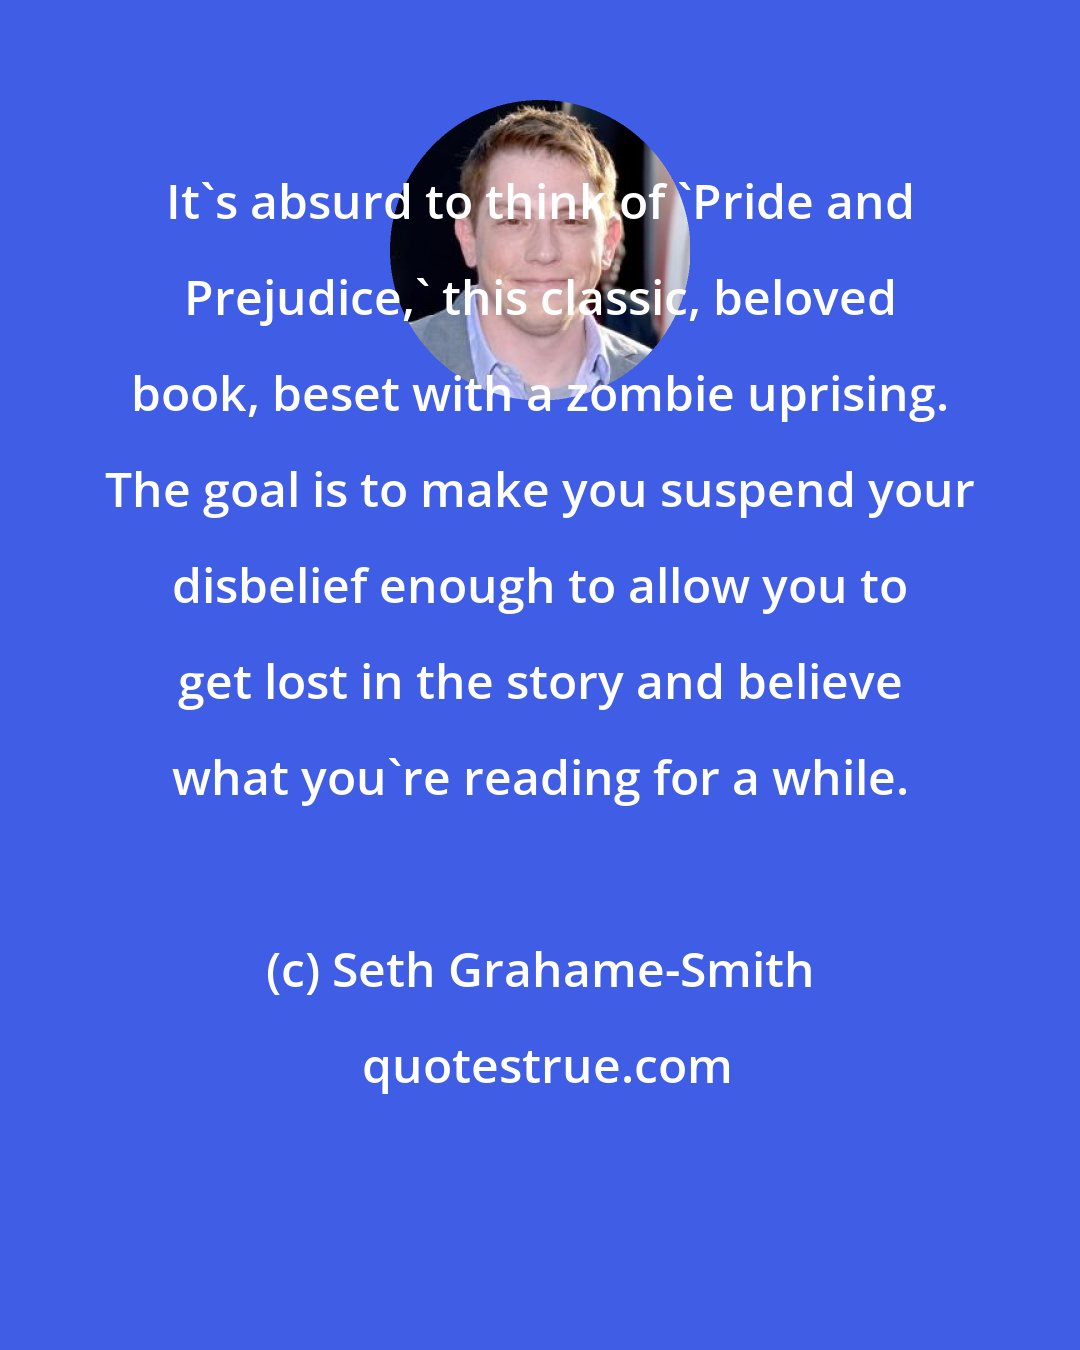 Seth Grahame-Smith: It's absurd to think of 'Pride and Prejudice,' this classic, beloved book, beset with a zombie uprising. The goal is to make you suspend your disbelief enough to allow you to get lost in the story and believe what you're reading for a while.